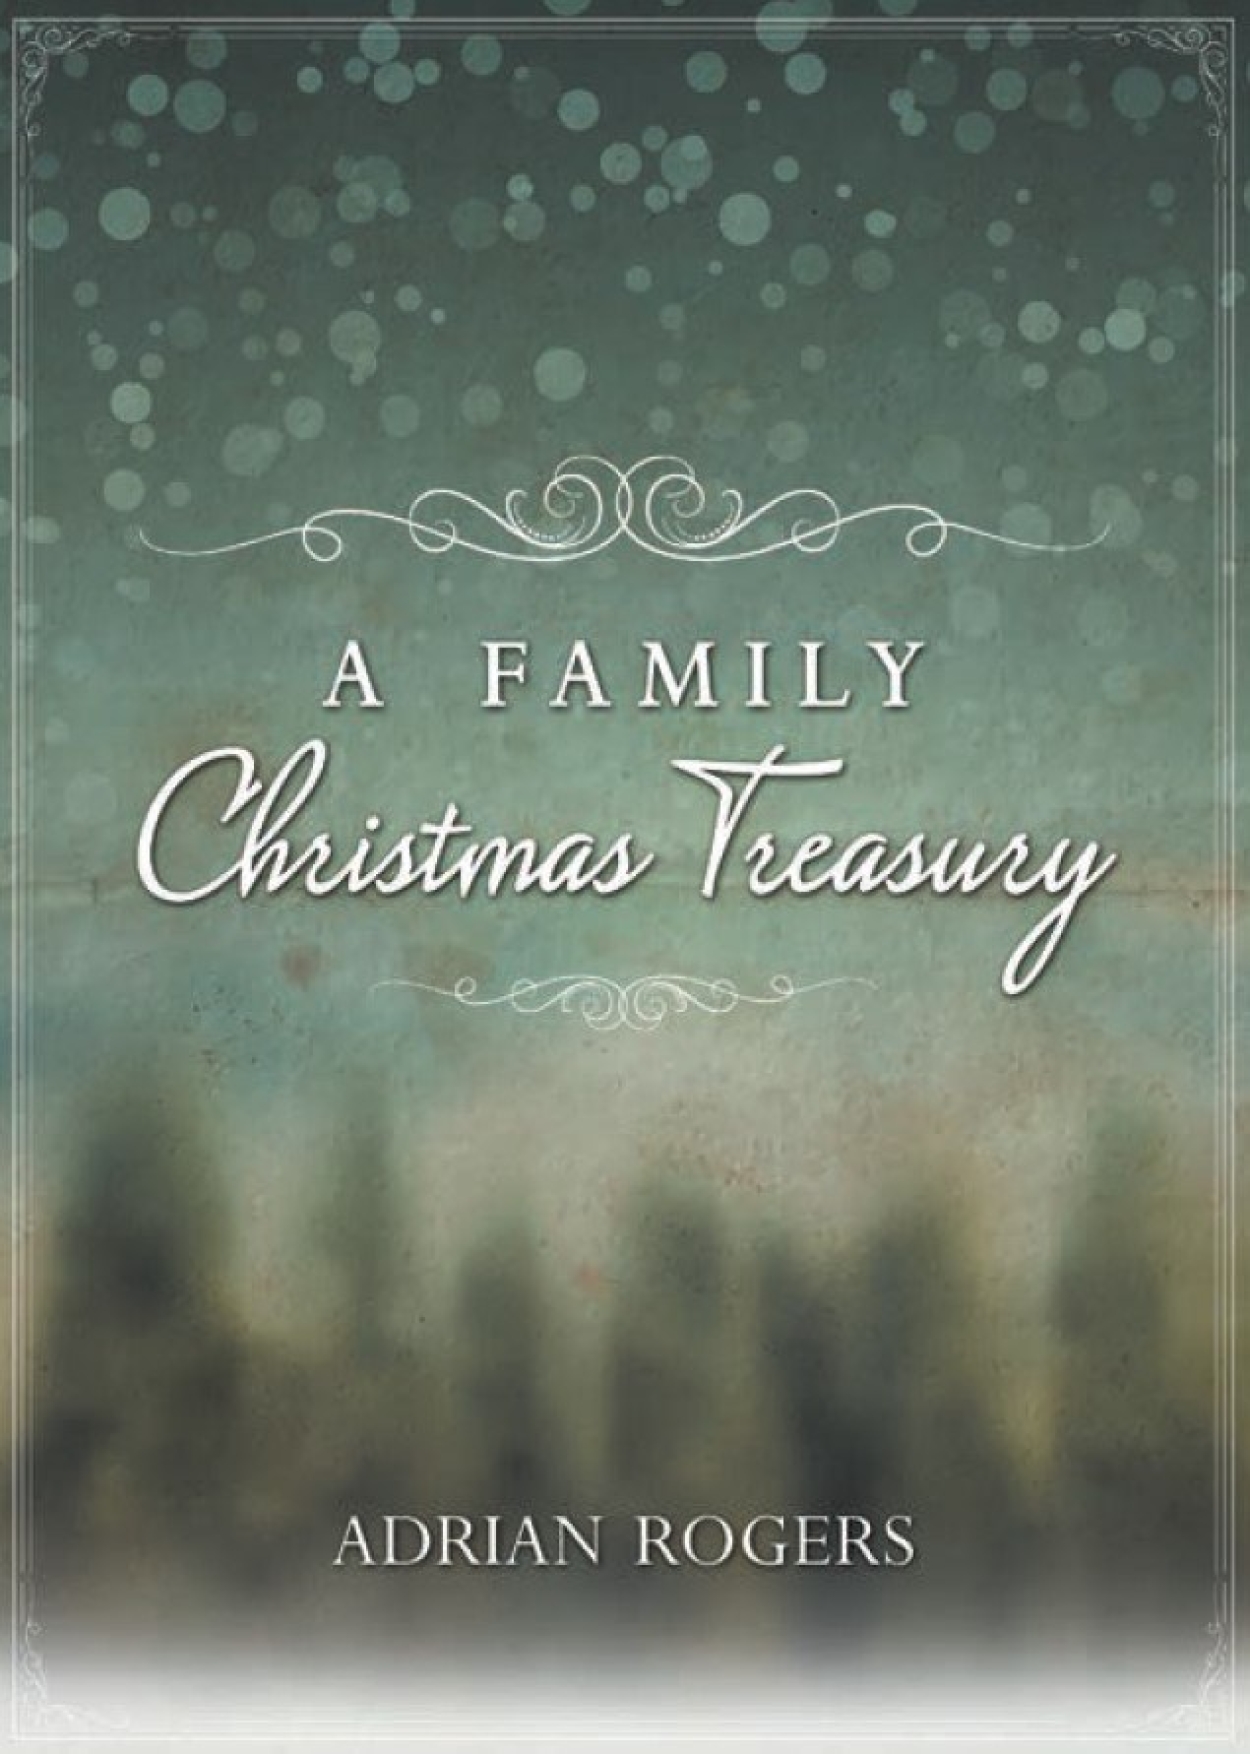 B106 a family christmas treasury book STORE DETAIL front